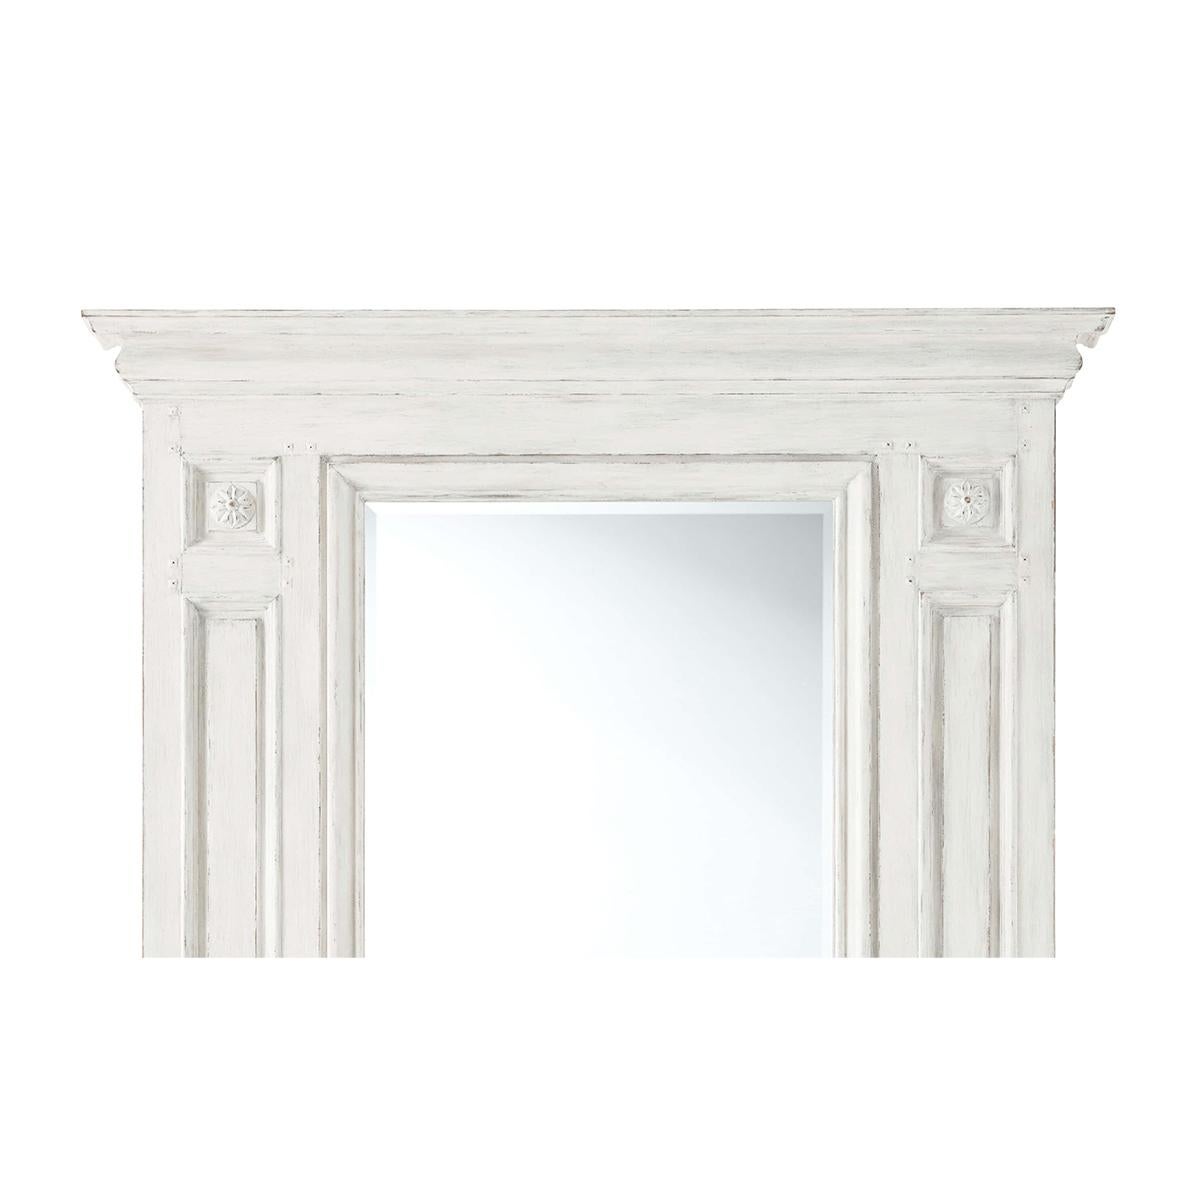 A French neoclassic style white painted and rubbed mirror with a molded cornice, paneled uprights each with flowerhead reliefs and with a beveled mirror. 

Dimensions: 52